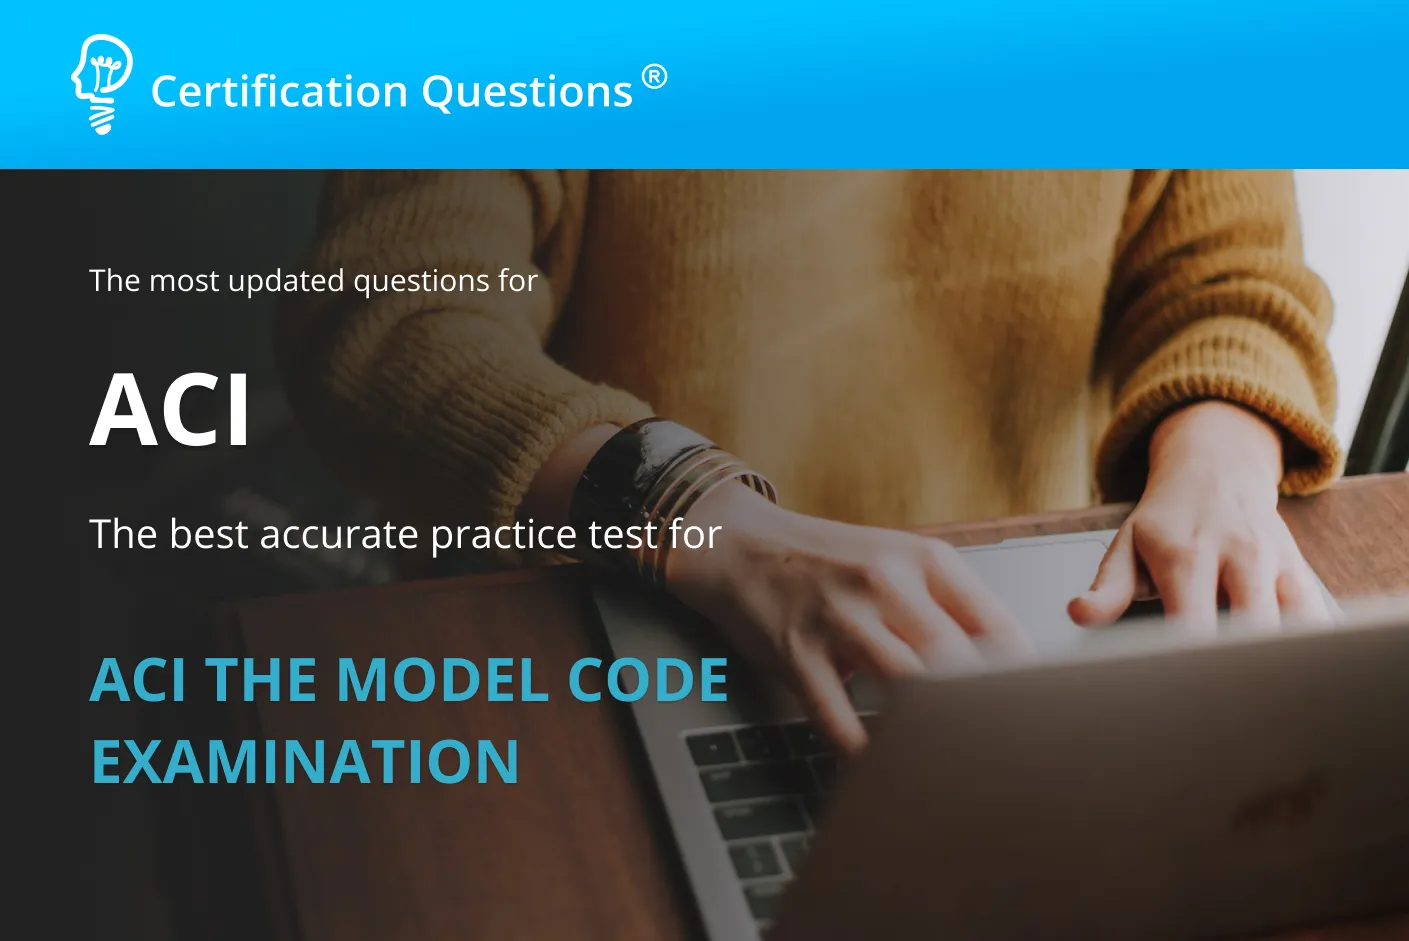 This image represents the ACI the model code examination